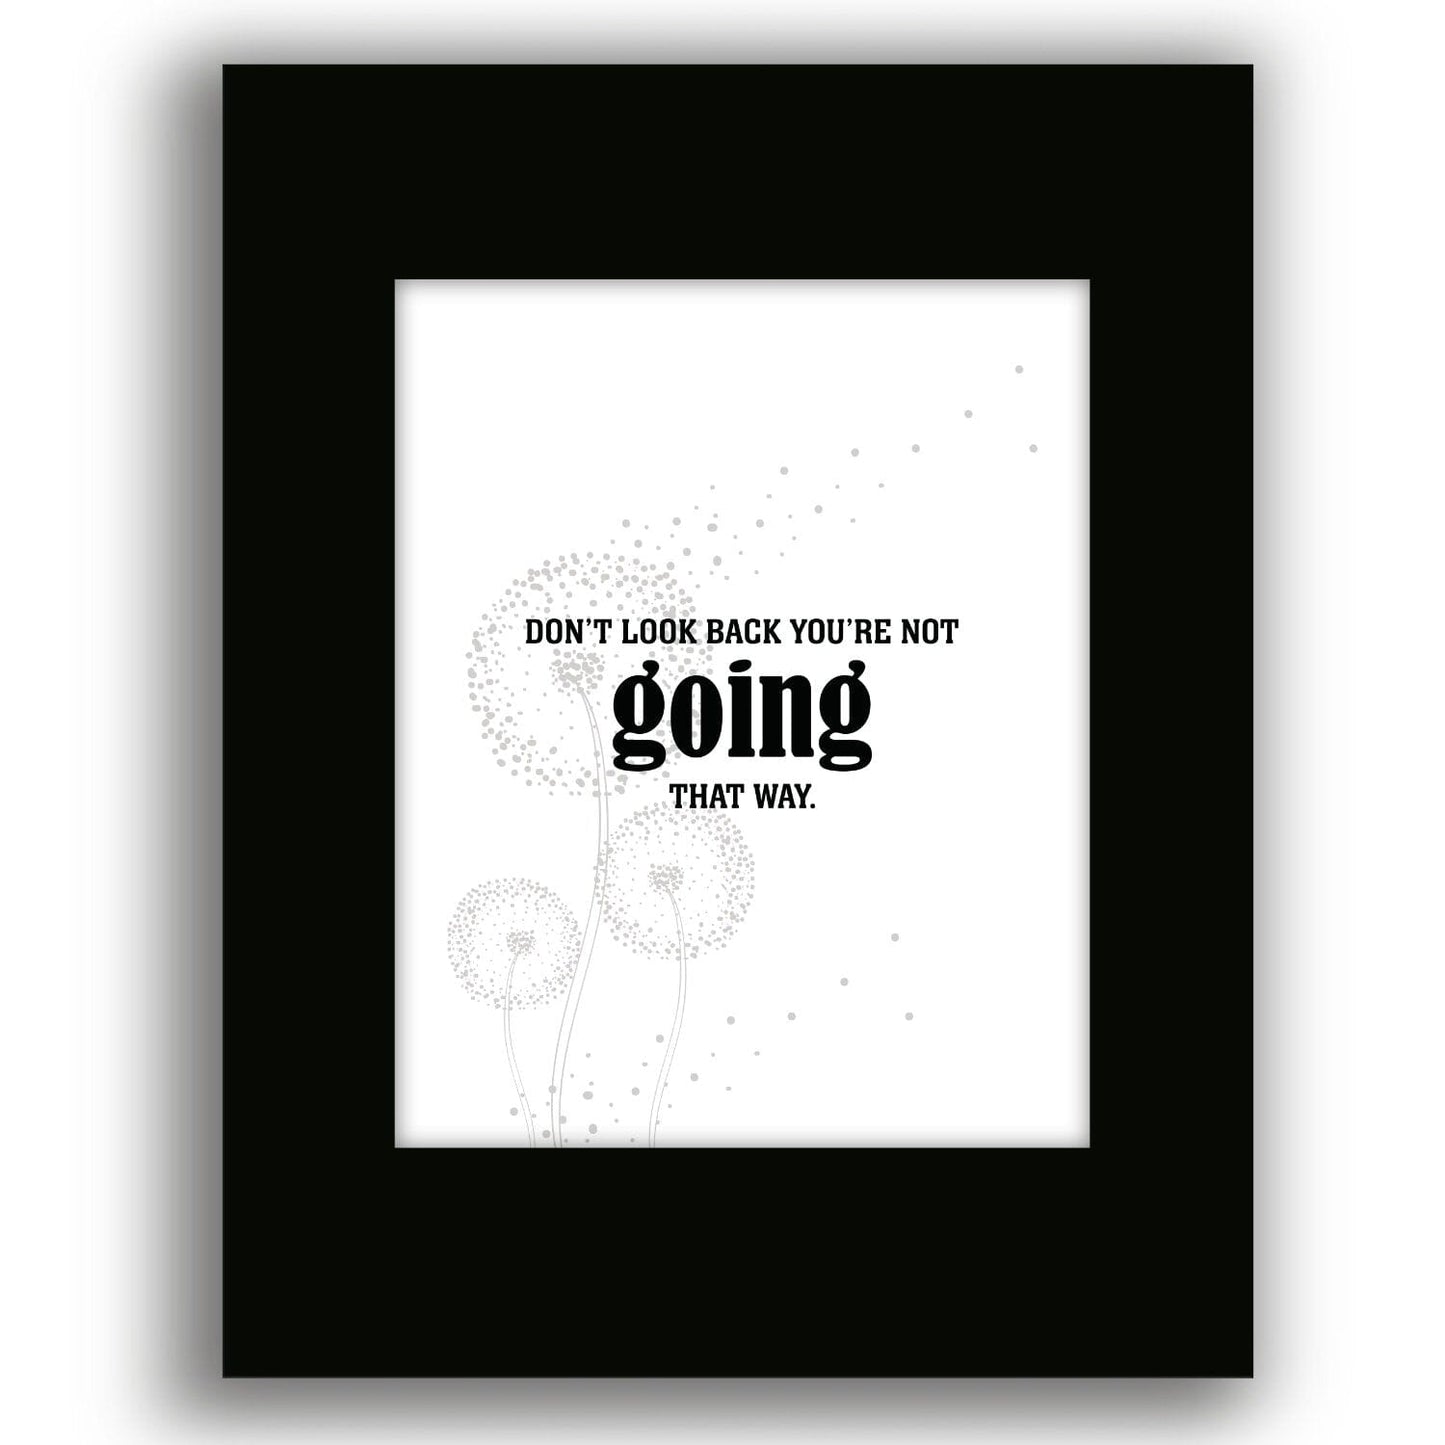 Don't Look Back You're Not Going that Way - Wise Witty Art Wise and Wiseass Quotes Song Lyrics Art 8x10 Black Matted Print 